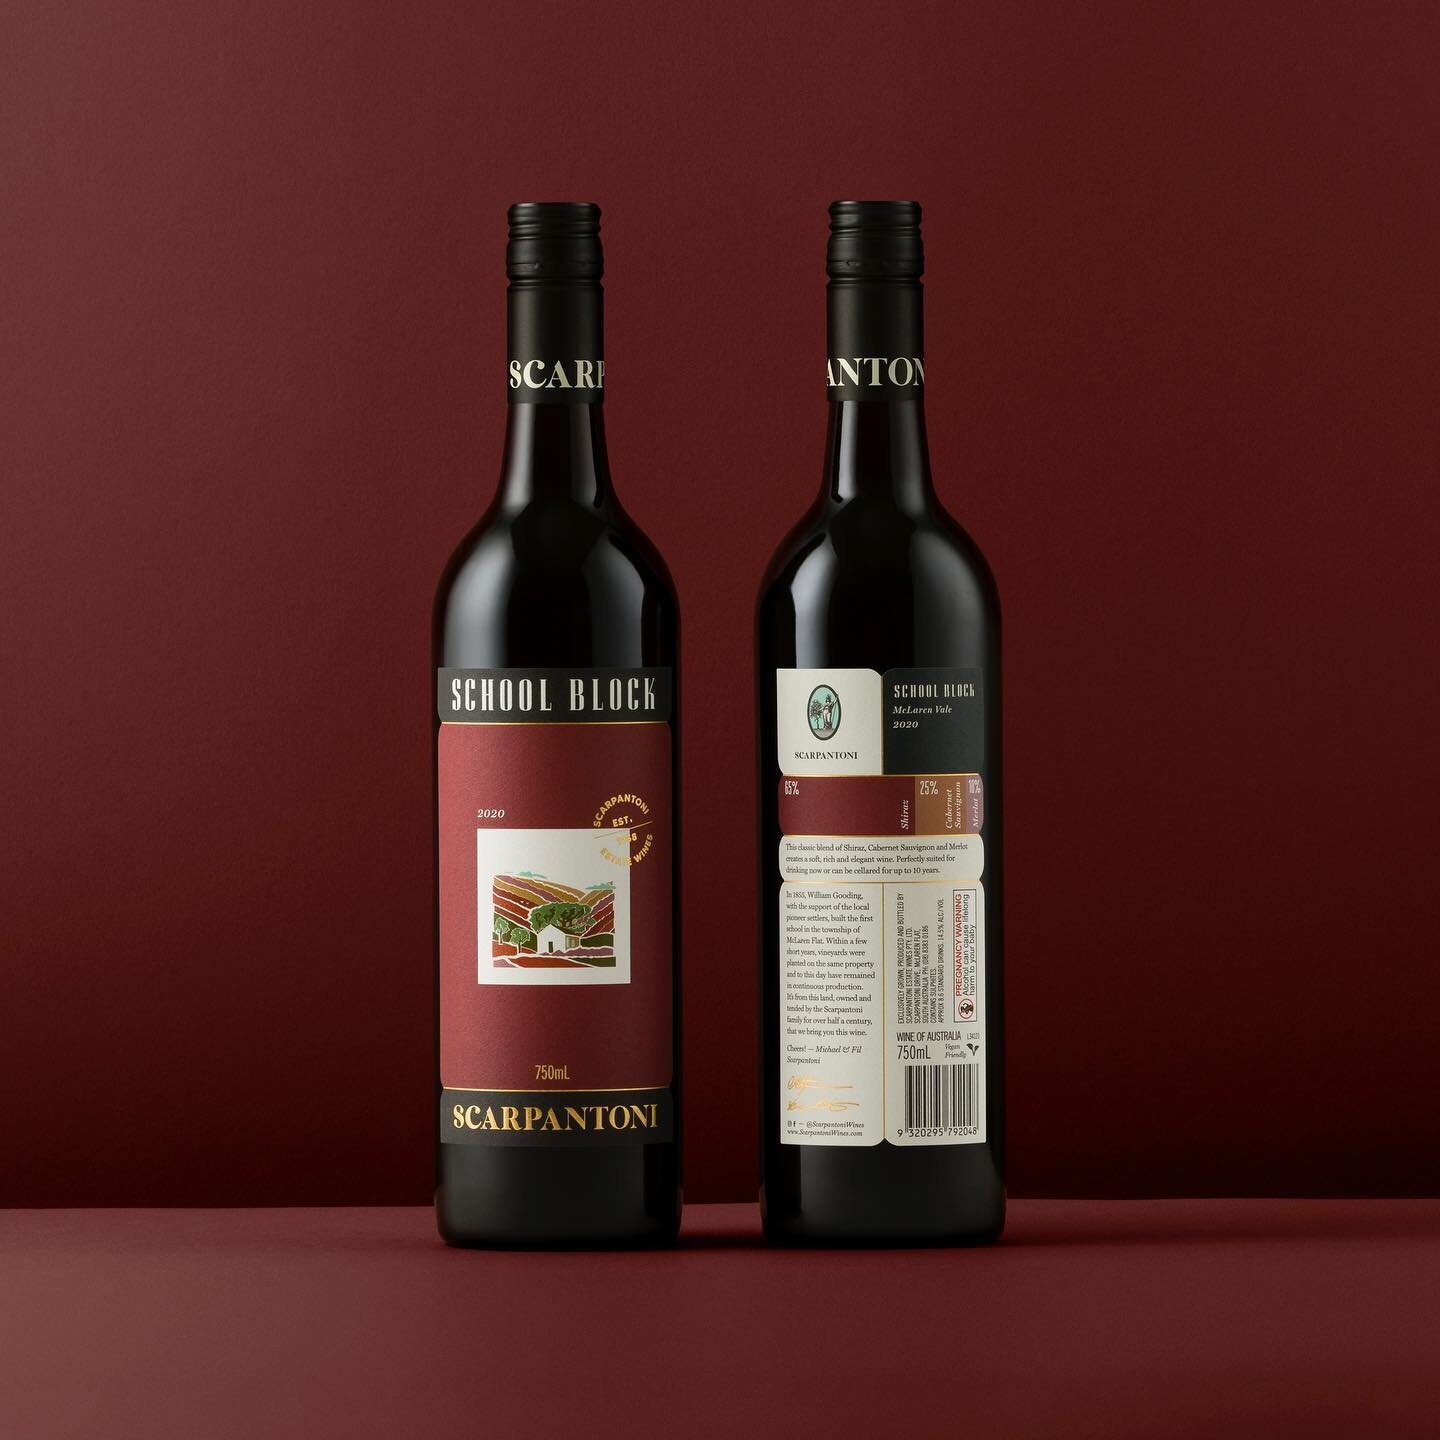 Scarpantoni &lsquo;School Block&rsquo; has been a go-to wine amongst loyal fans for decades. Adored and trusted as a consistently impressive red blend at an affordable figure. Following Scarpantoni&rsquo;s recent rebrand, School Block received a nece